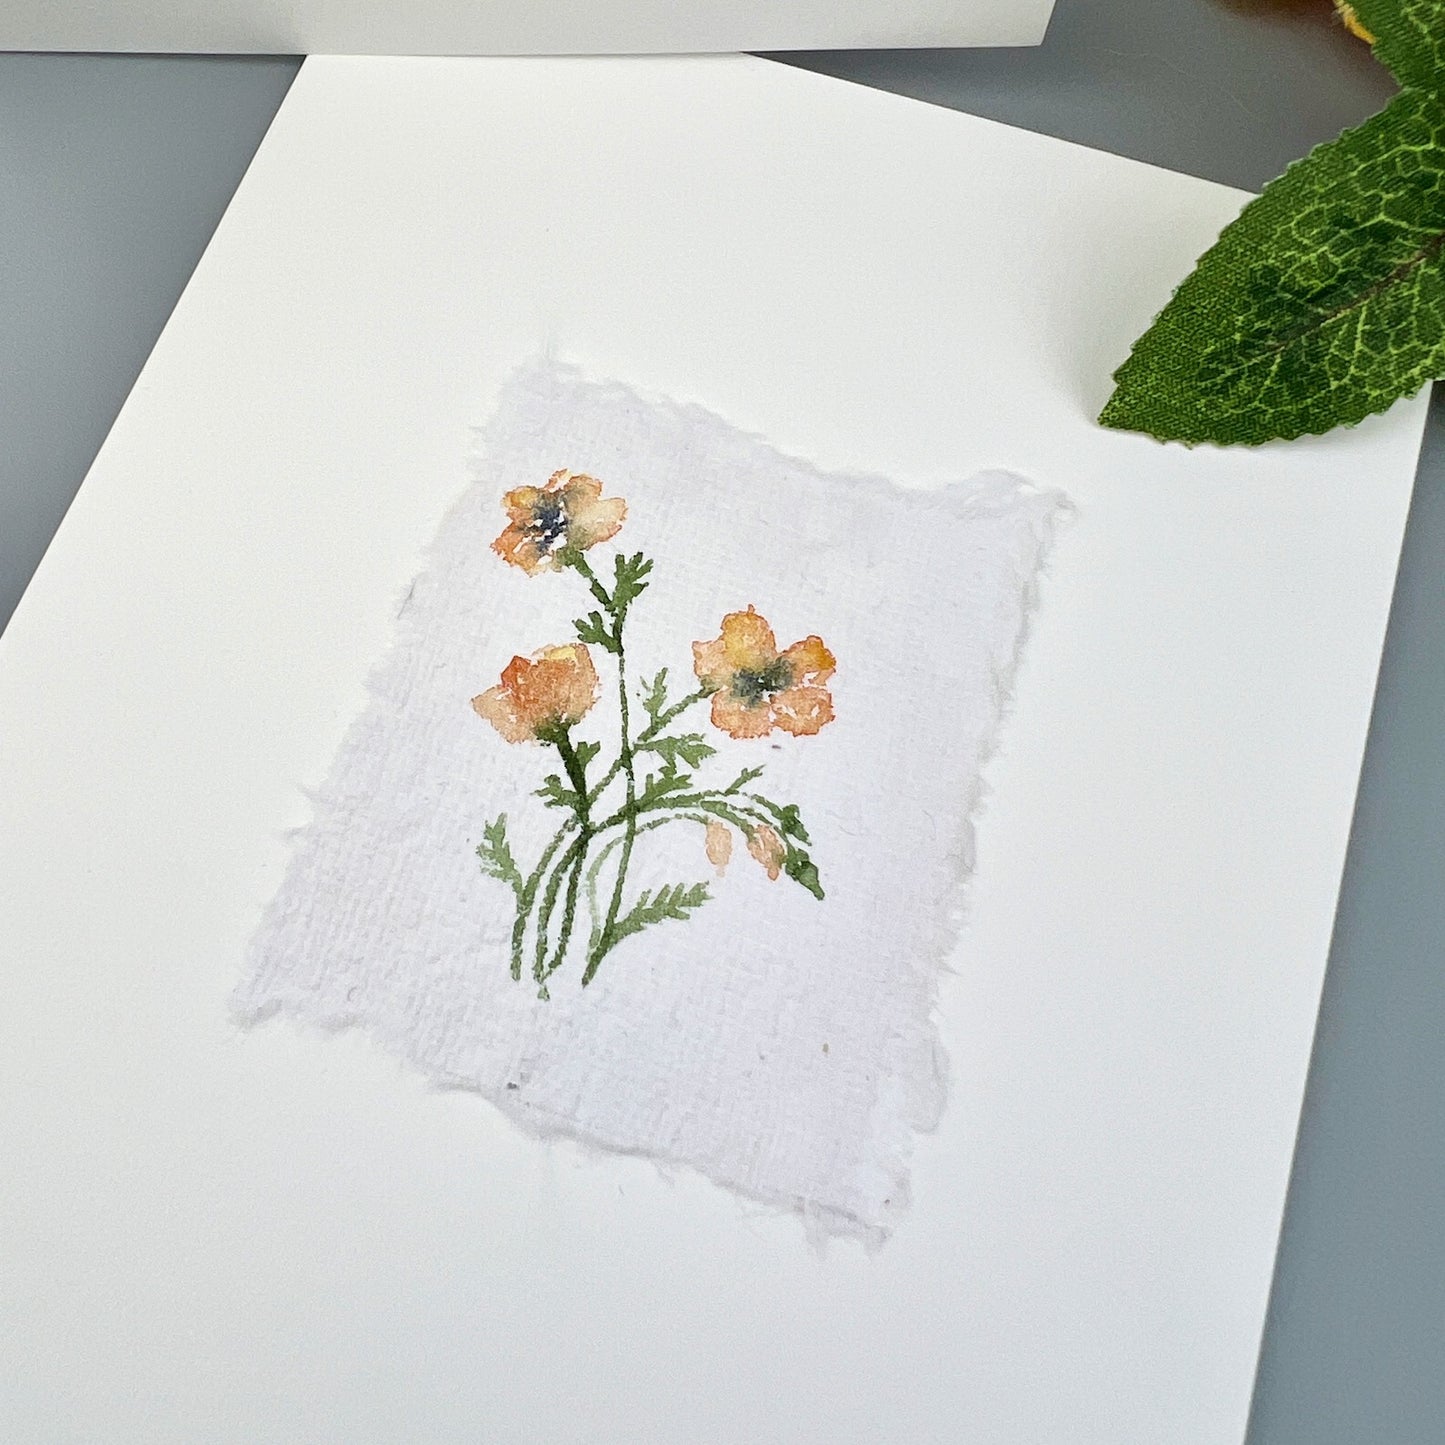 California Poppies - Hand-painted Greeting Cards - Original Watercolor Stationary